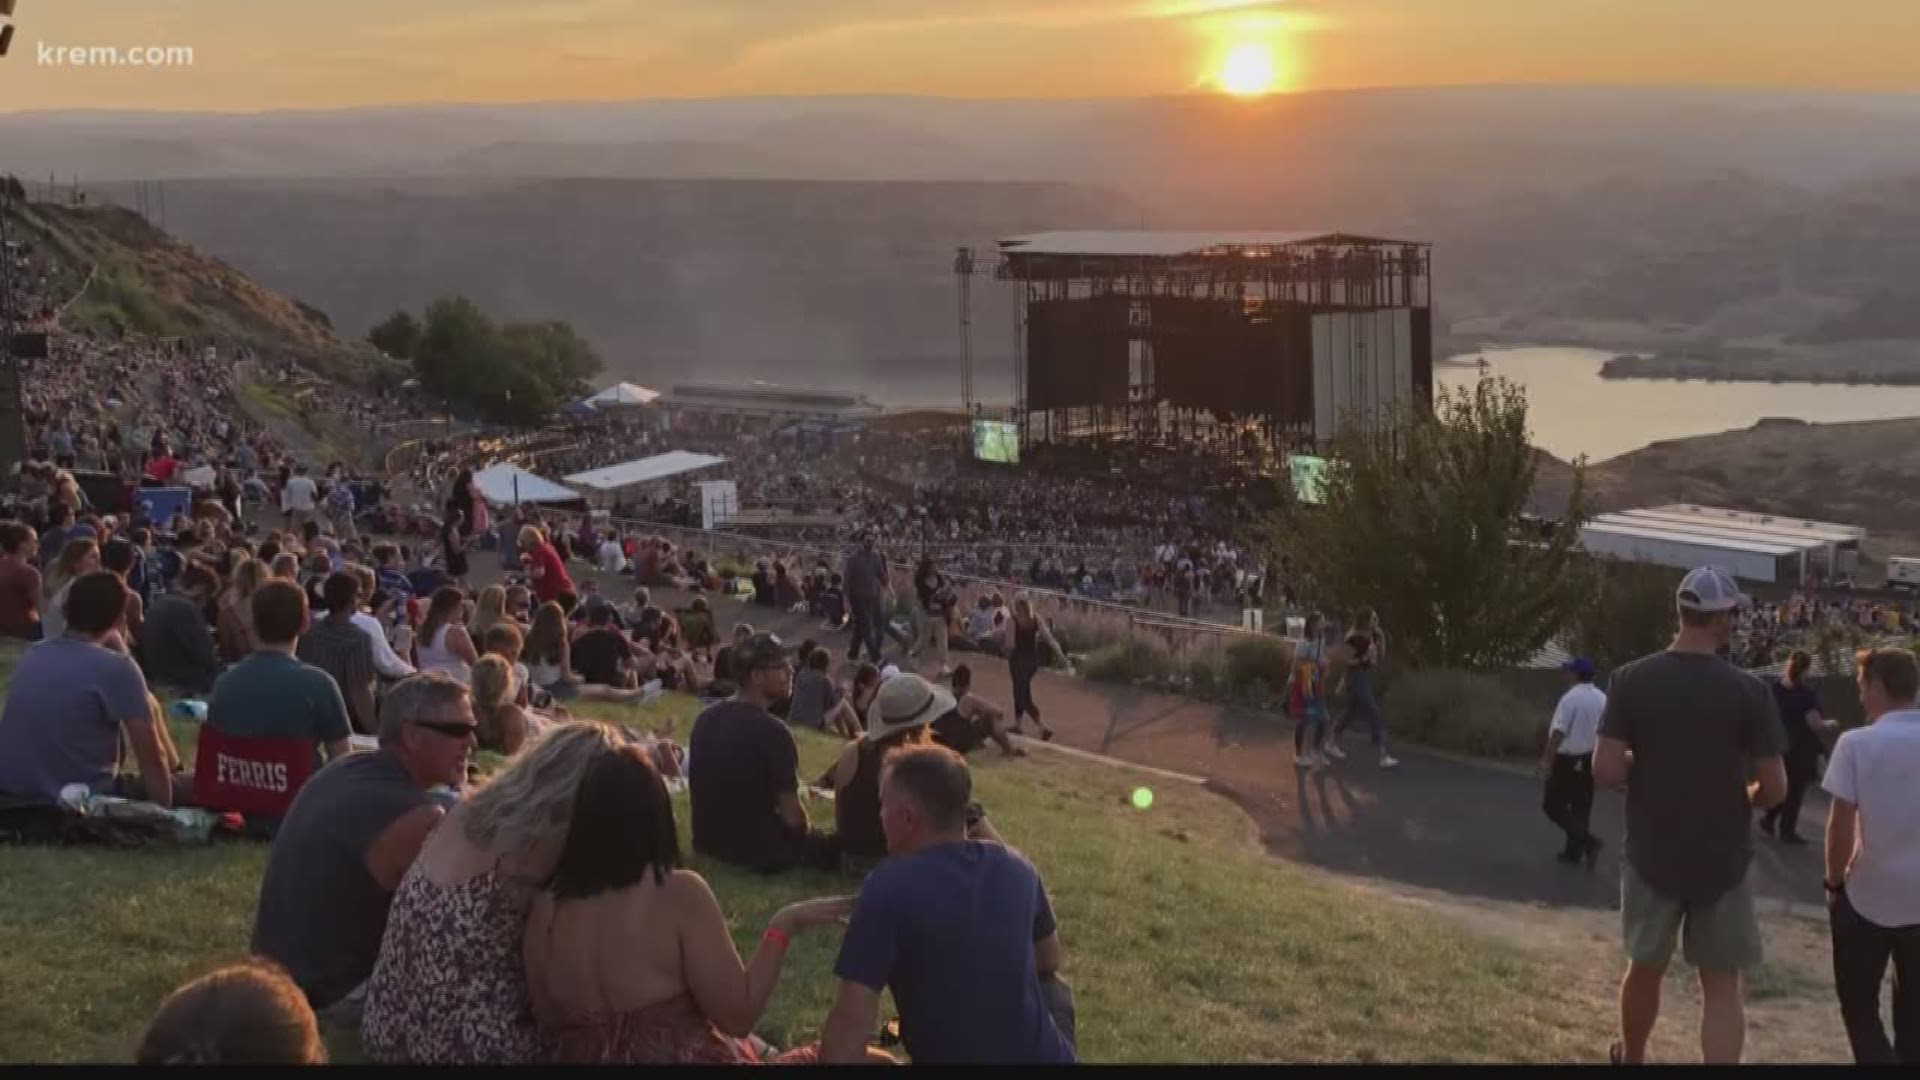 Grant Co. braces for financial impact of canceled Amphitheater